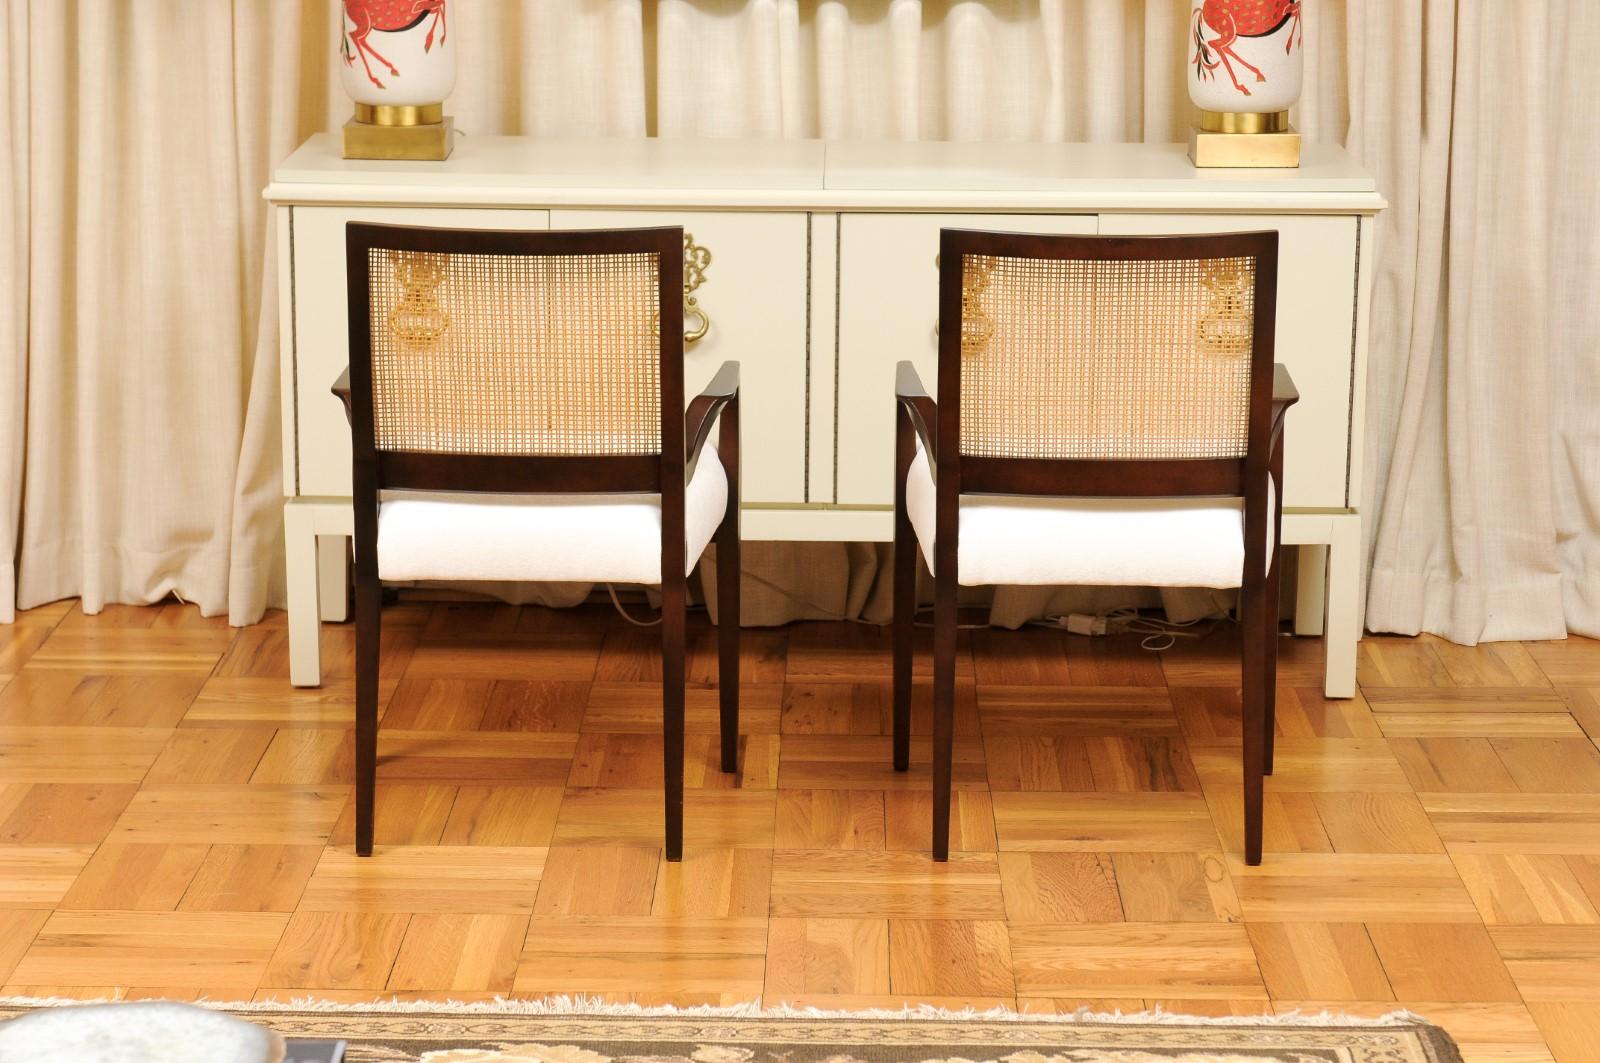 All Arms, Unrivaled Set of 14 Cane Dining Chairs by Michael Taylor, circa 1960 For Sale 1